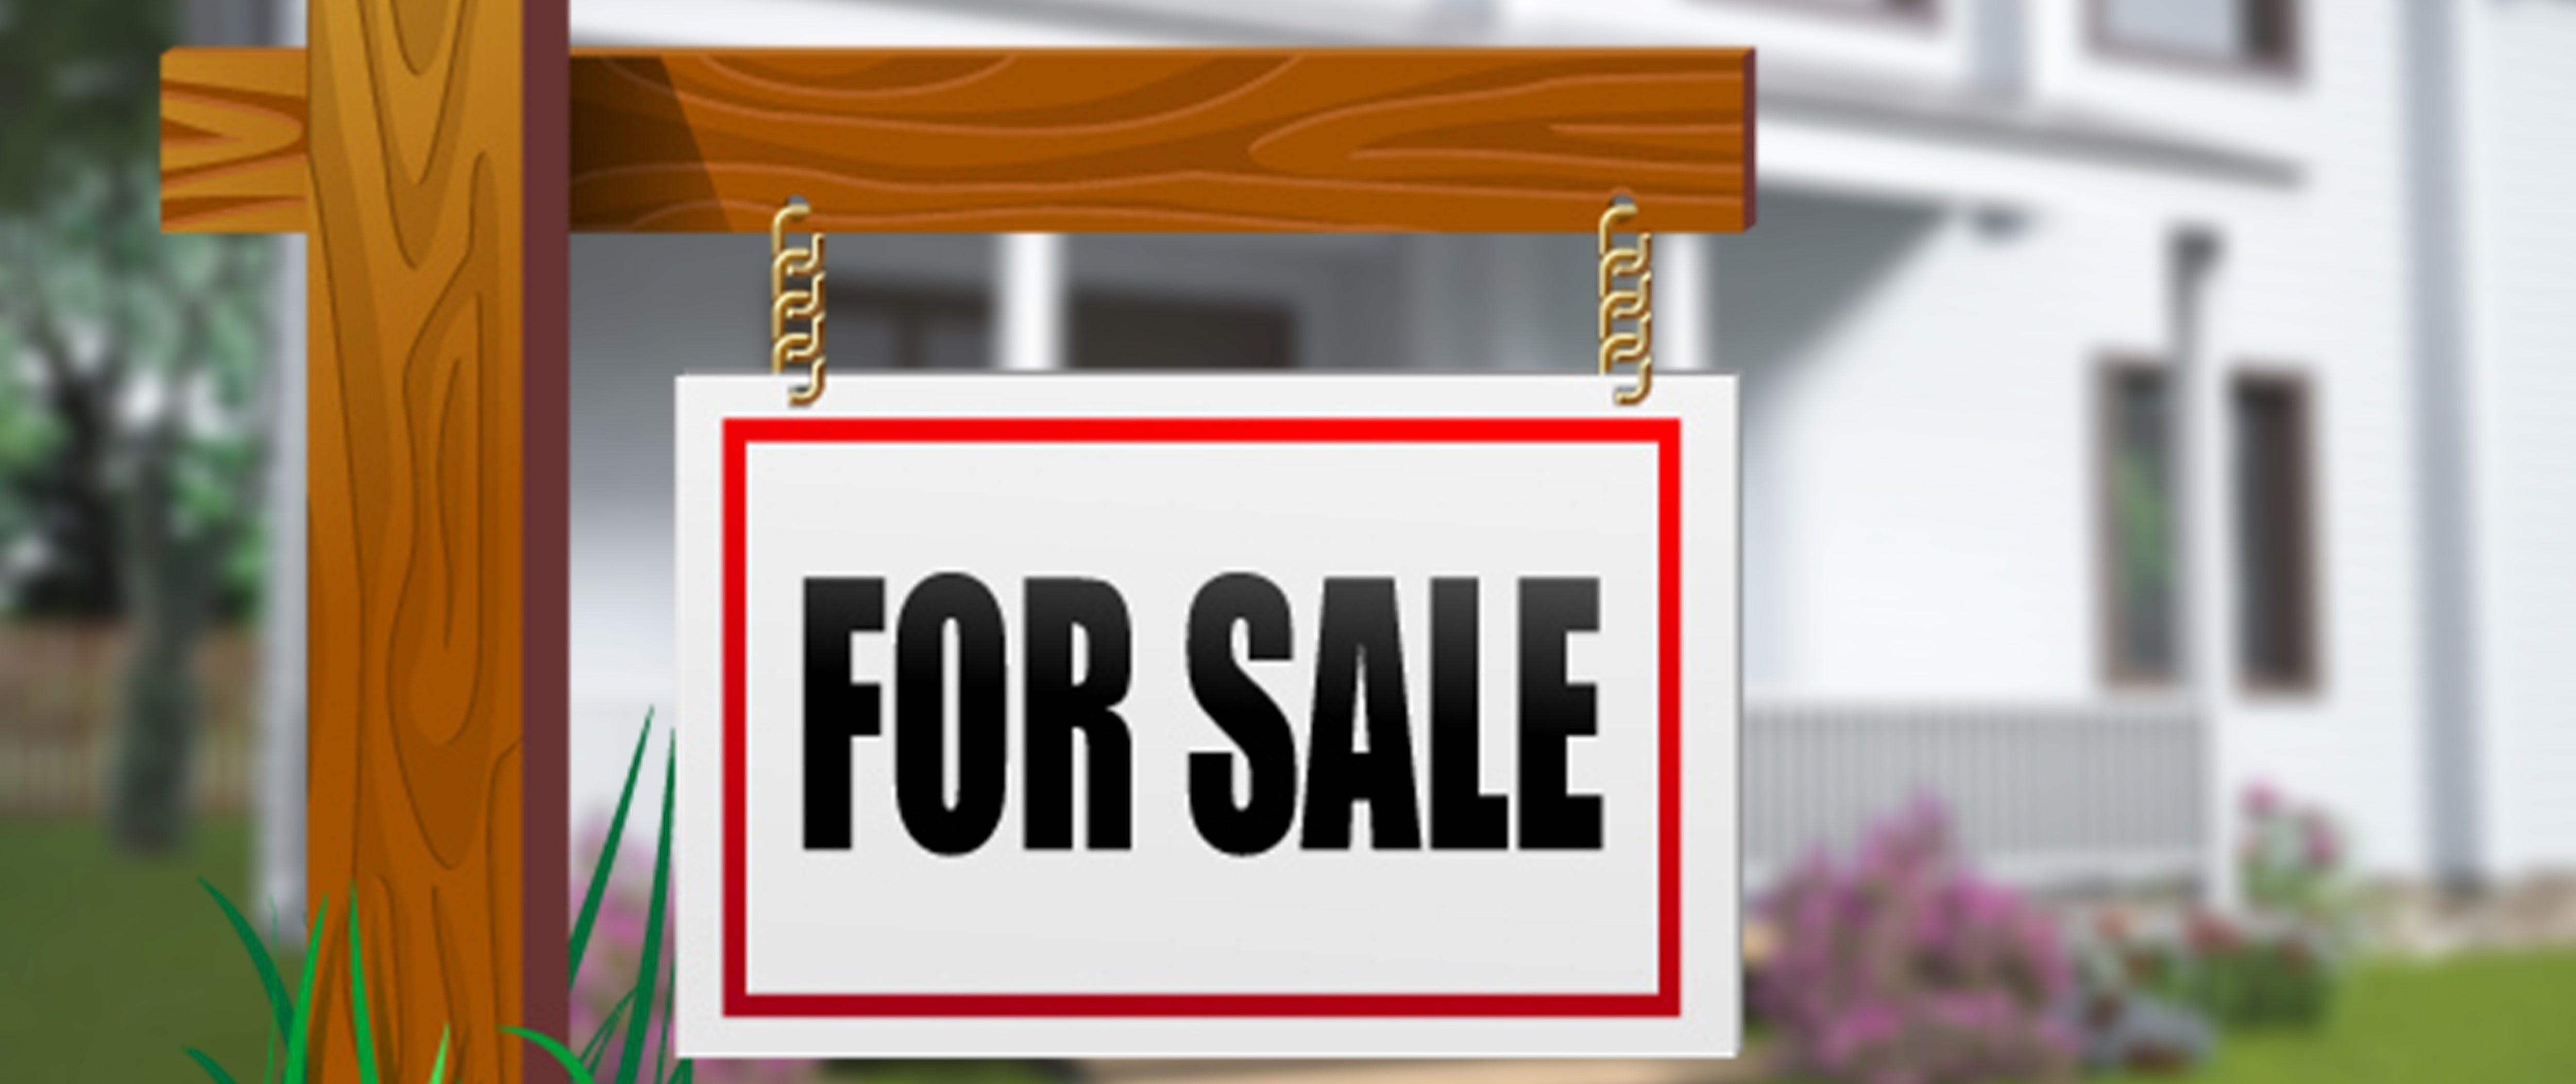 Illustration of a "For Sale" sign in front of a house | ©shutterstock.com